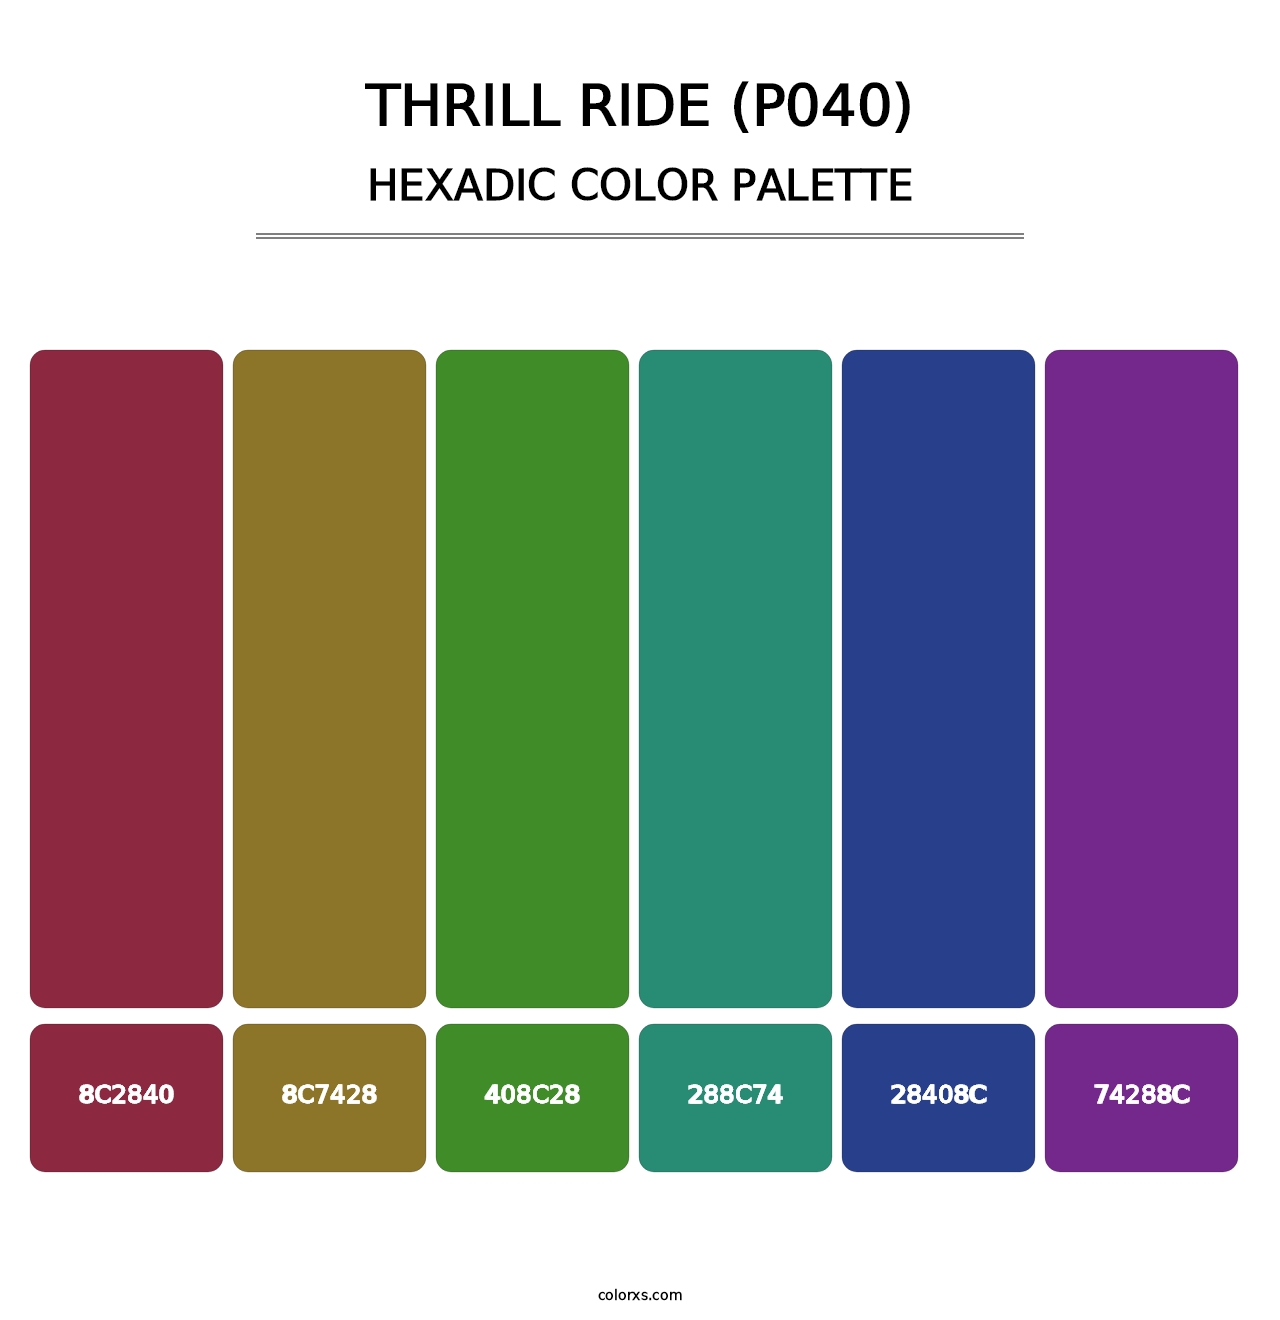 Thrill Ride (P040) - Hexadic Color Palette